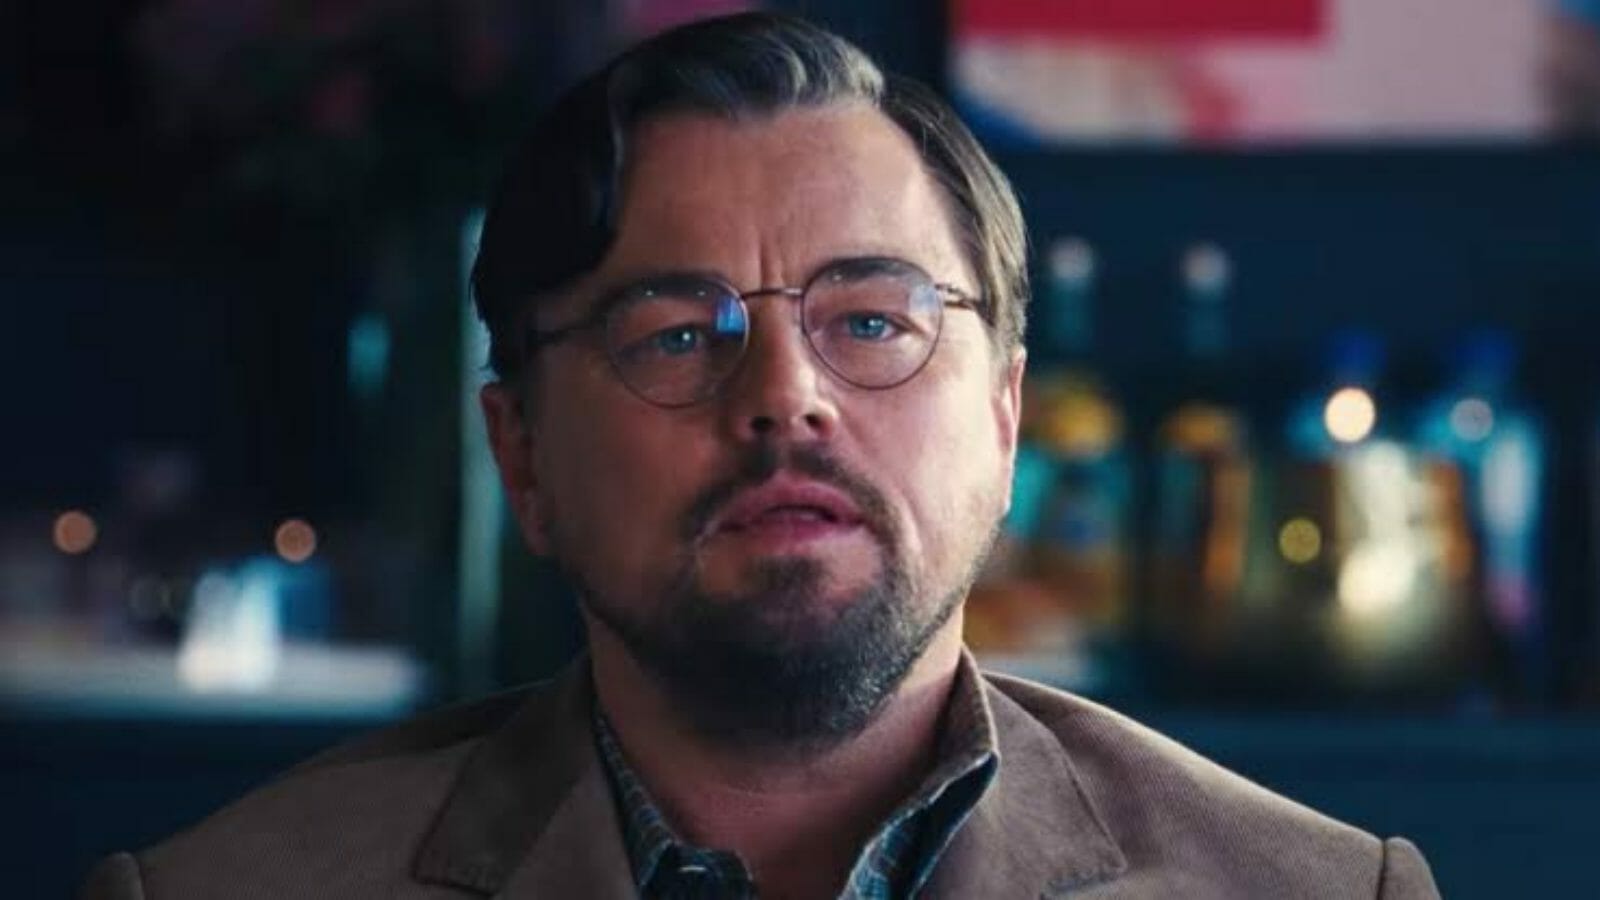 Leonardo DiCaprio as Dr Randall in 'Don't Look Up'